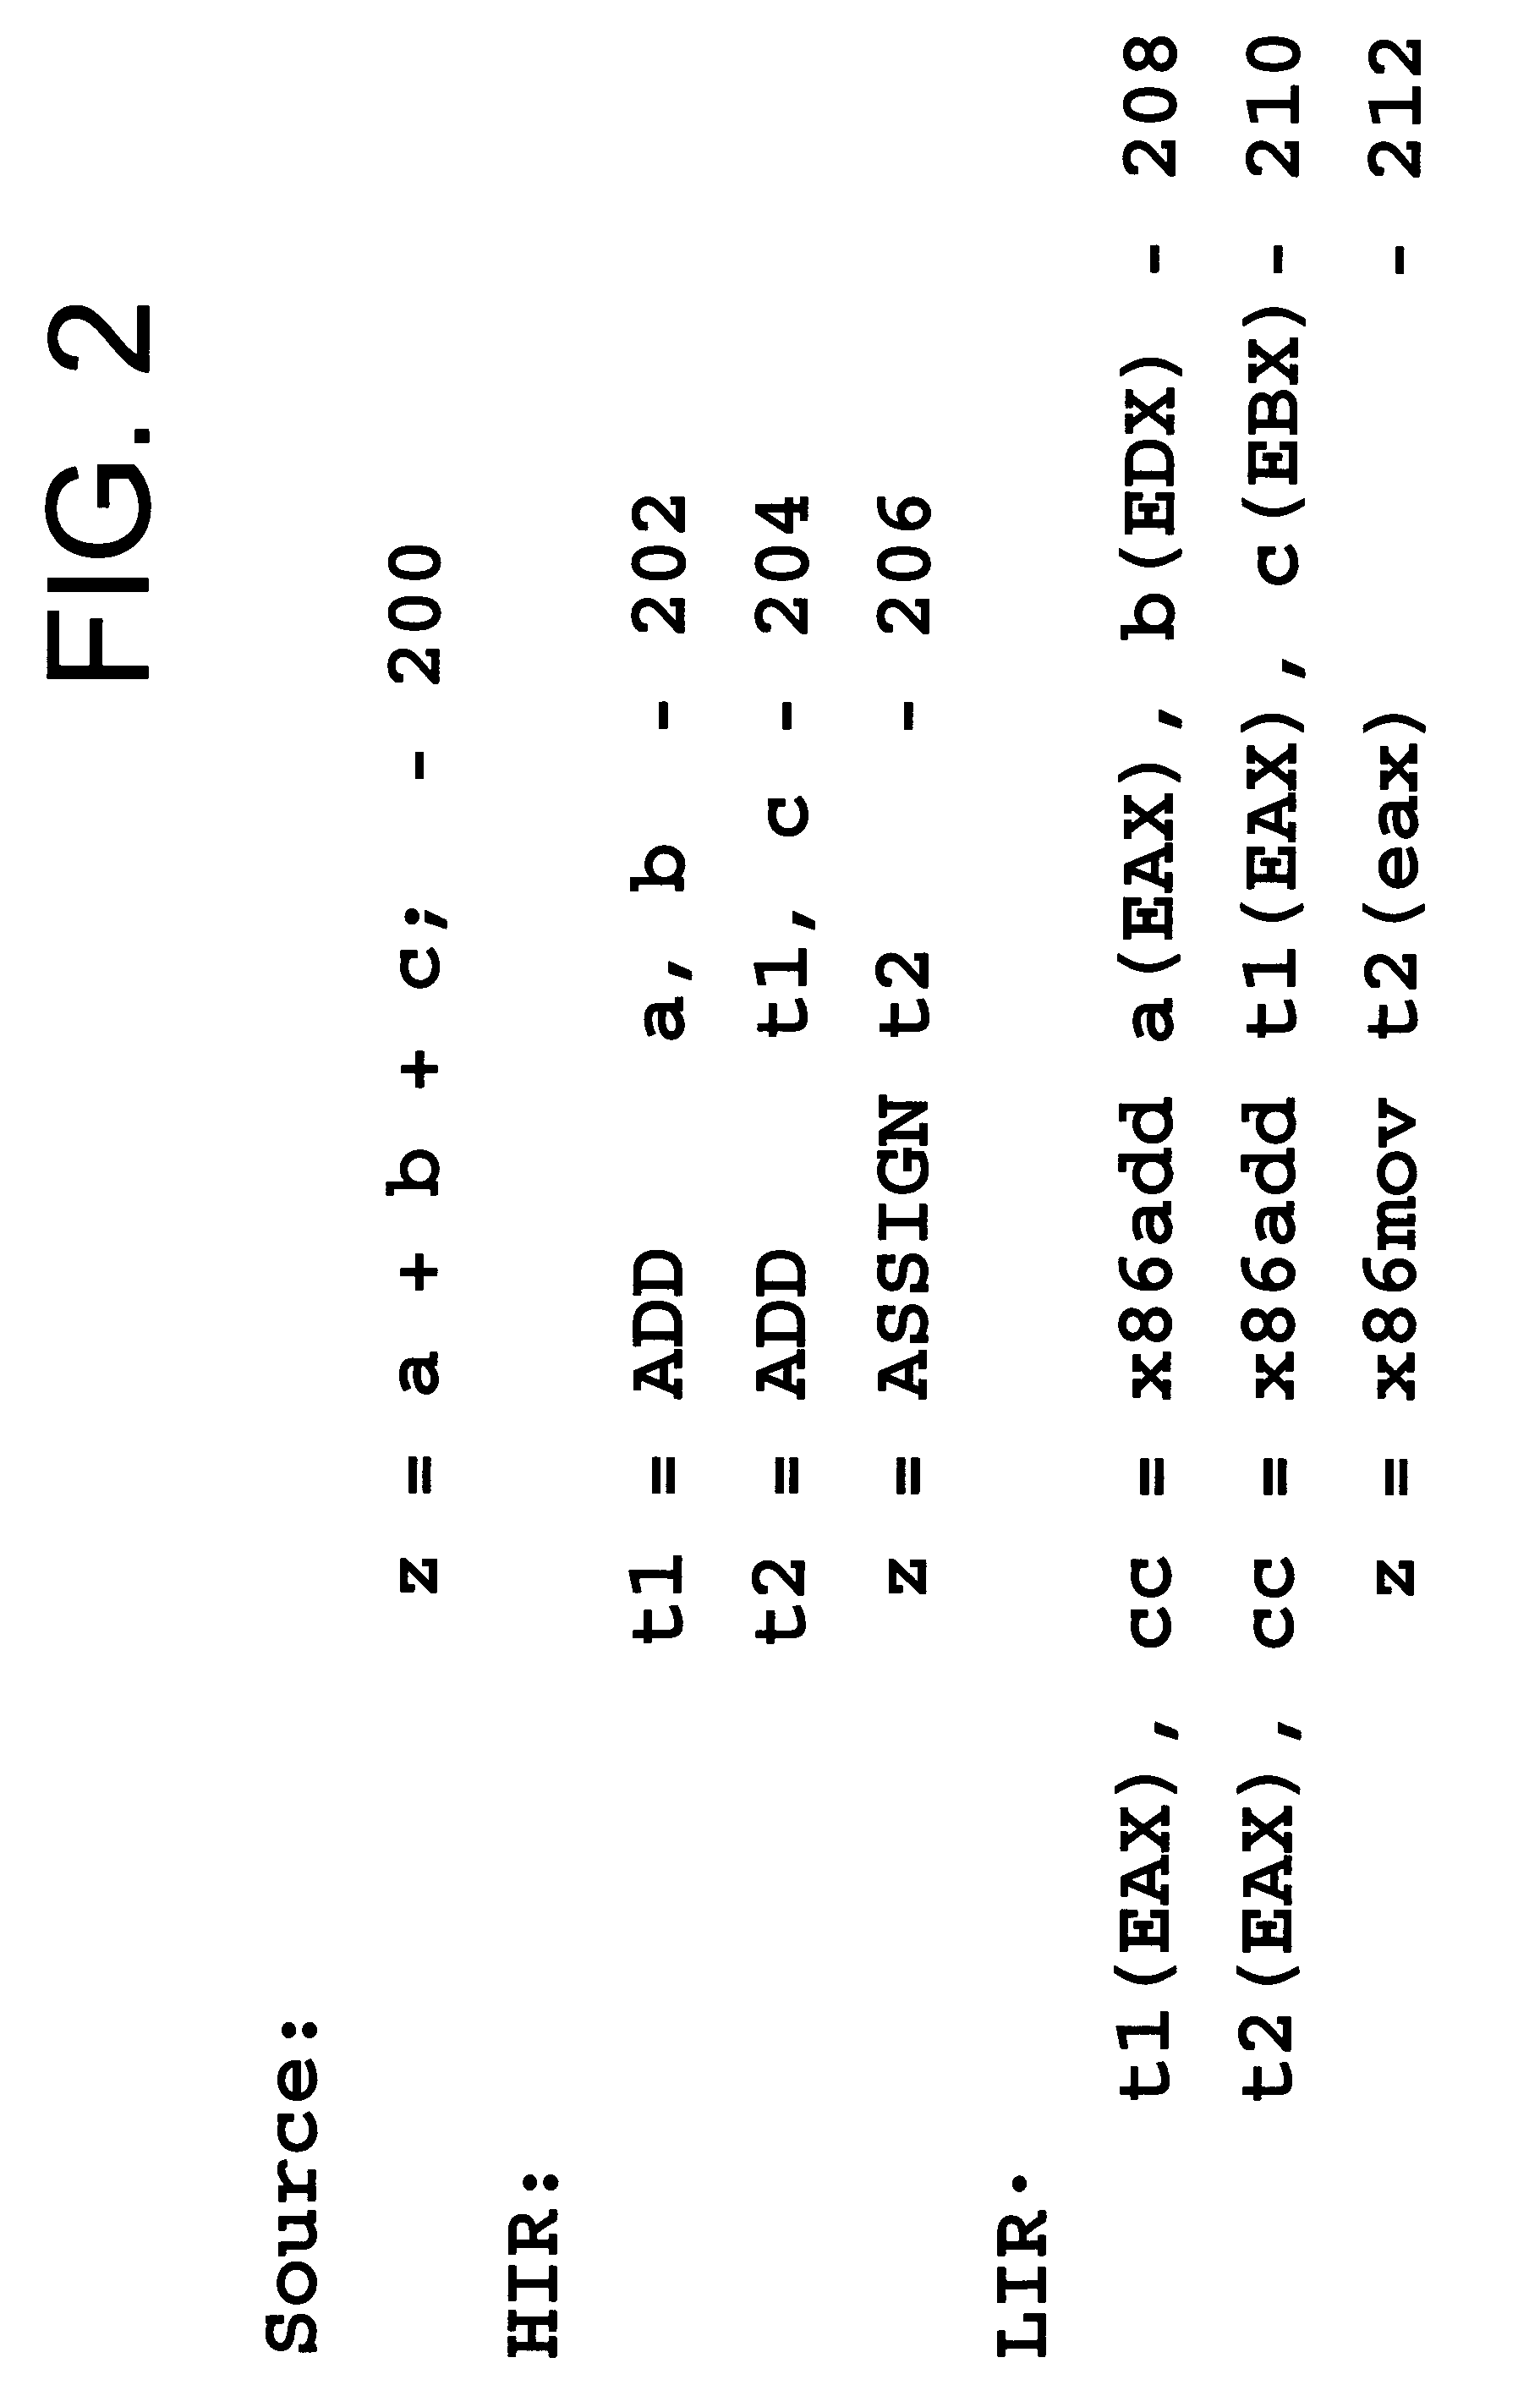 Type system for representing and checking consistency of heterogeneous program components during the process of compilation